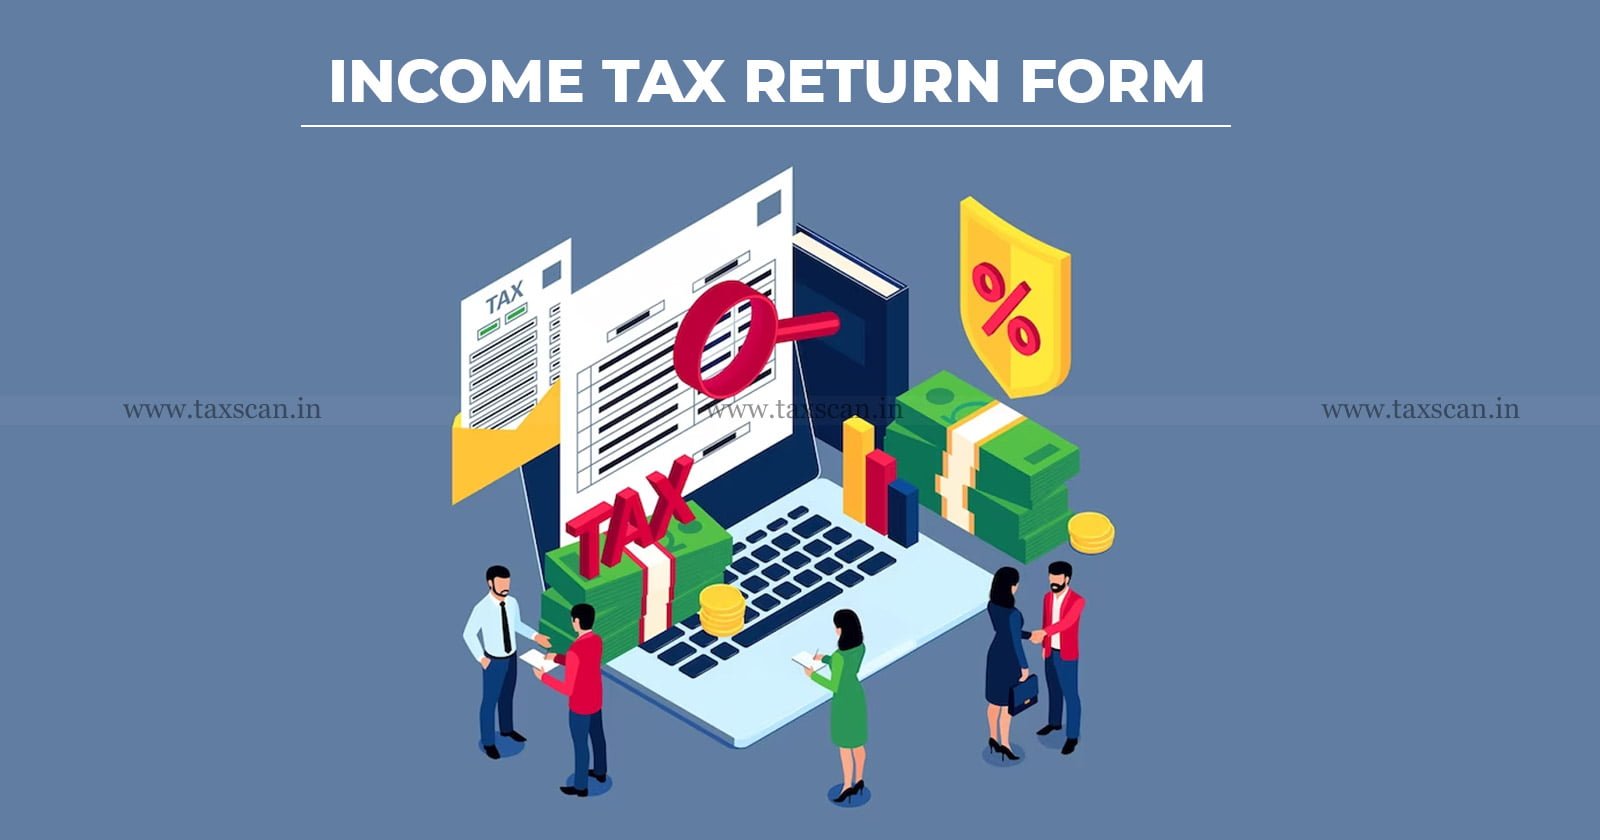 new-income-tax-return-forms-and-recent-changes-that-you-need-to-know